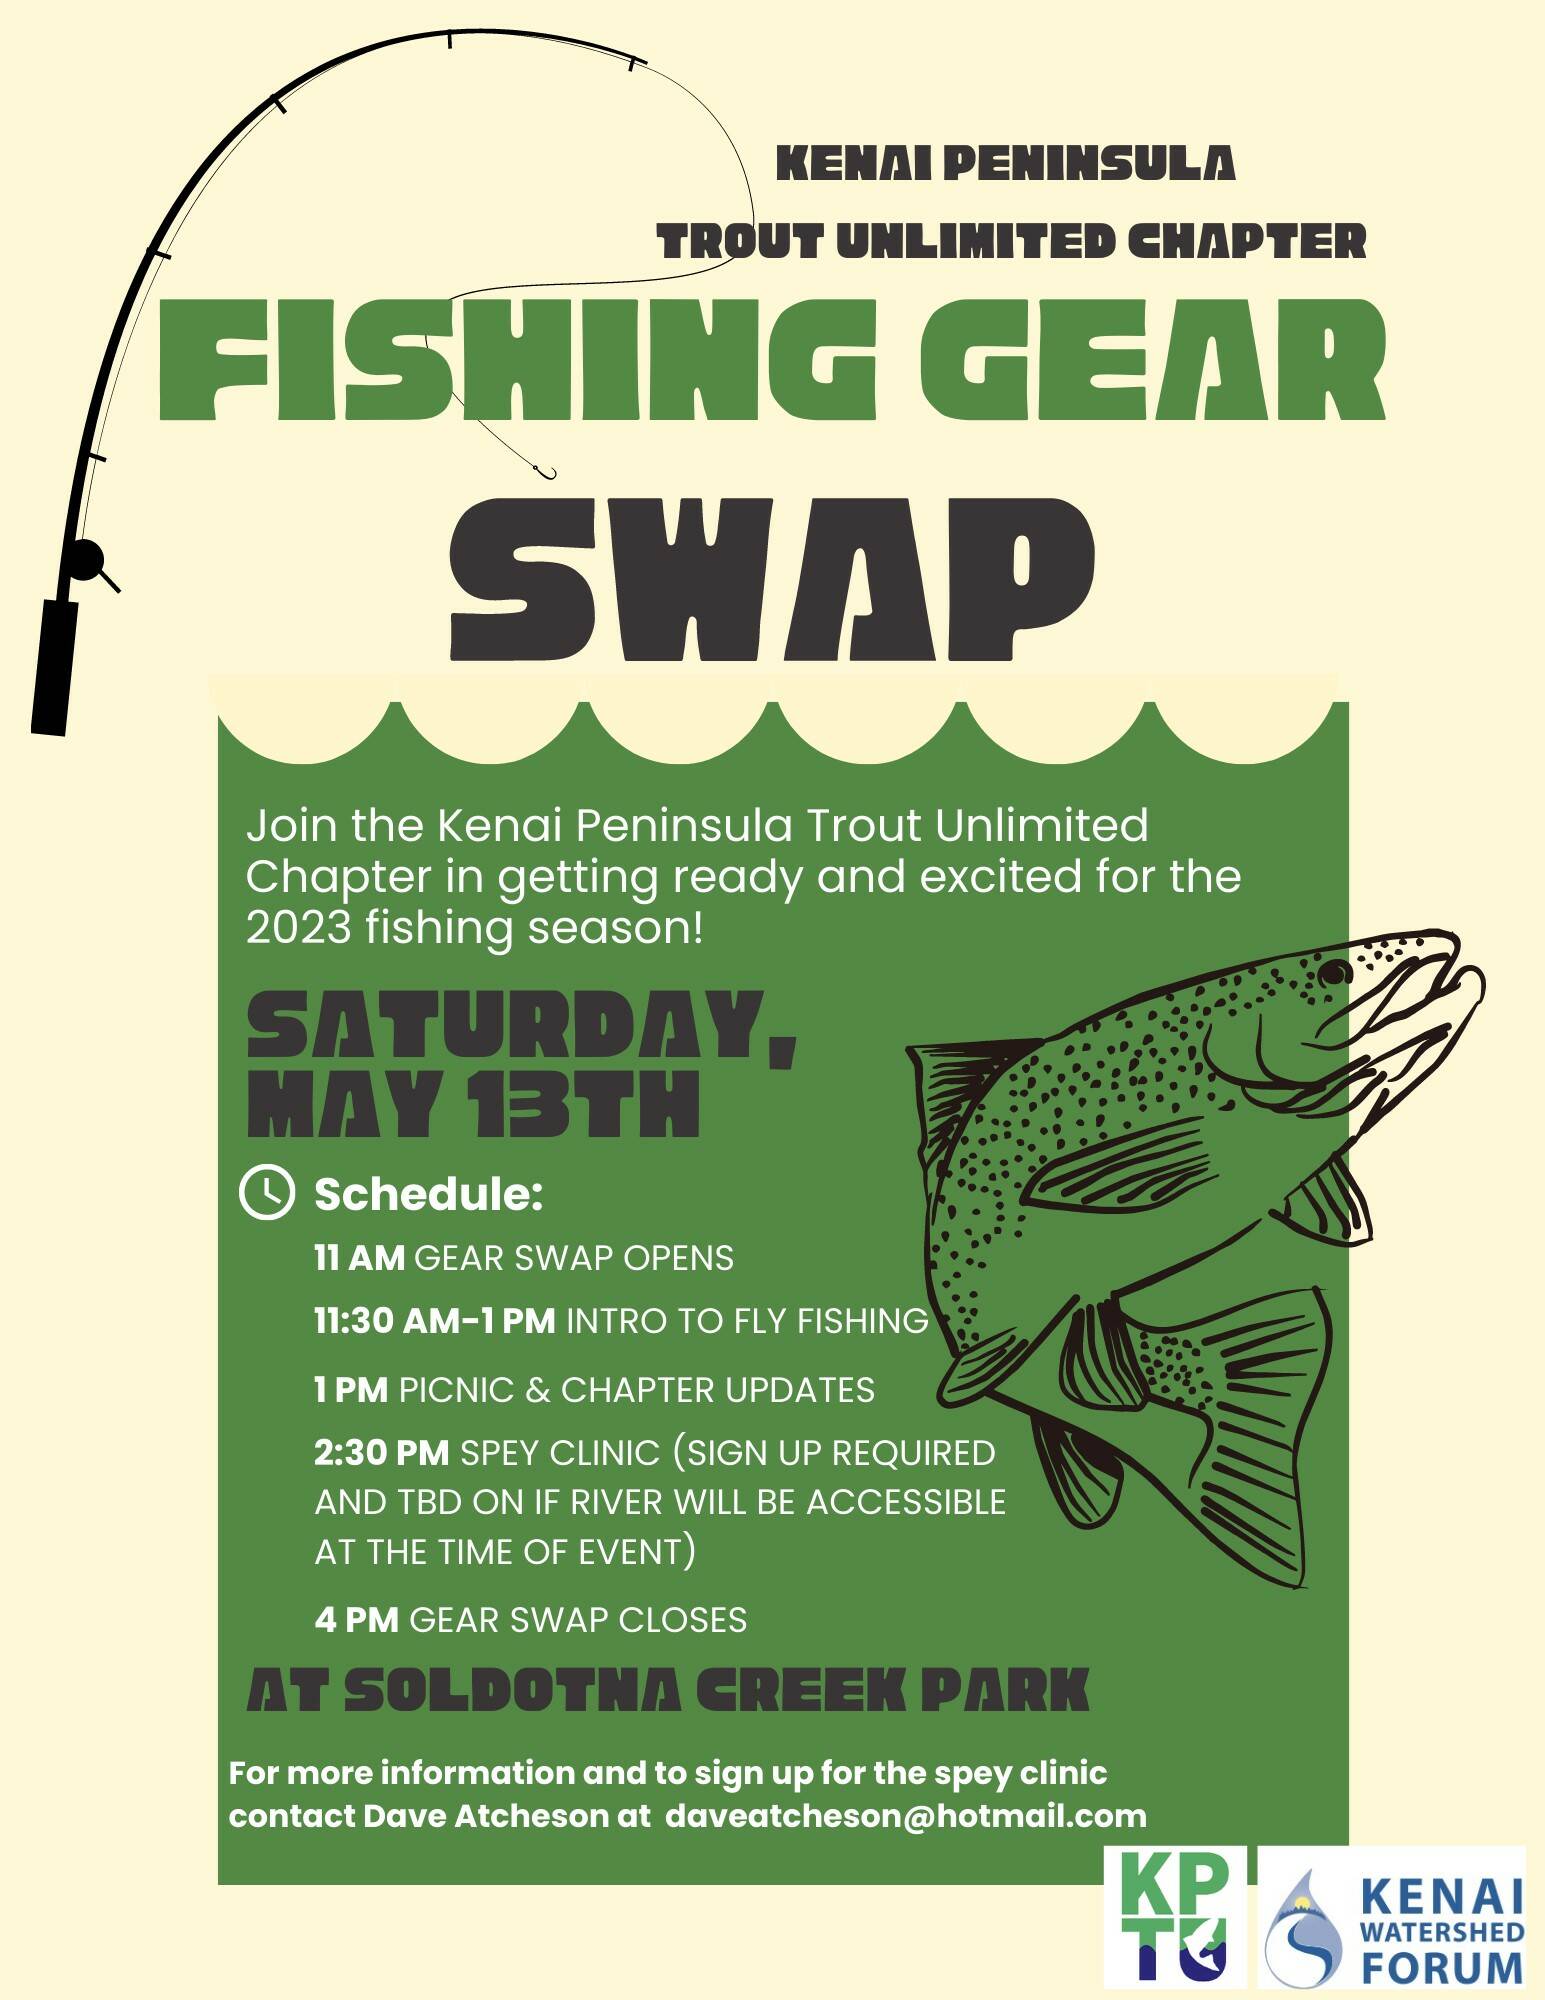 Trout Unlimited to host fishing gear swap May 13